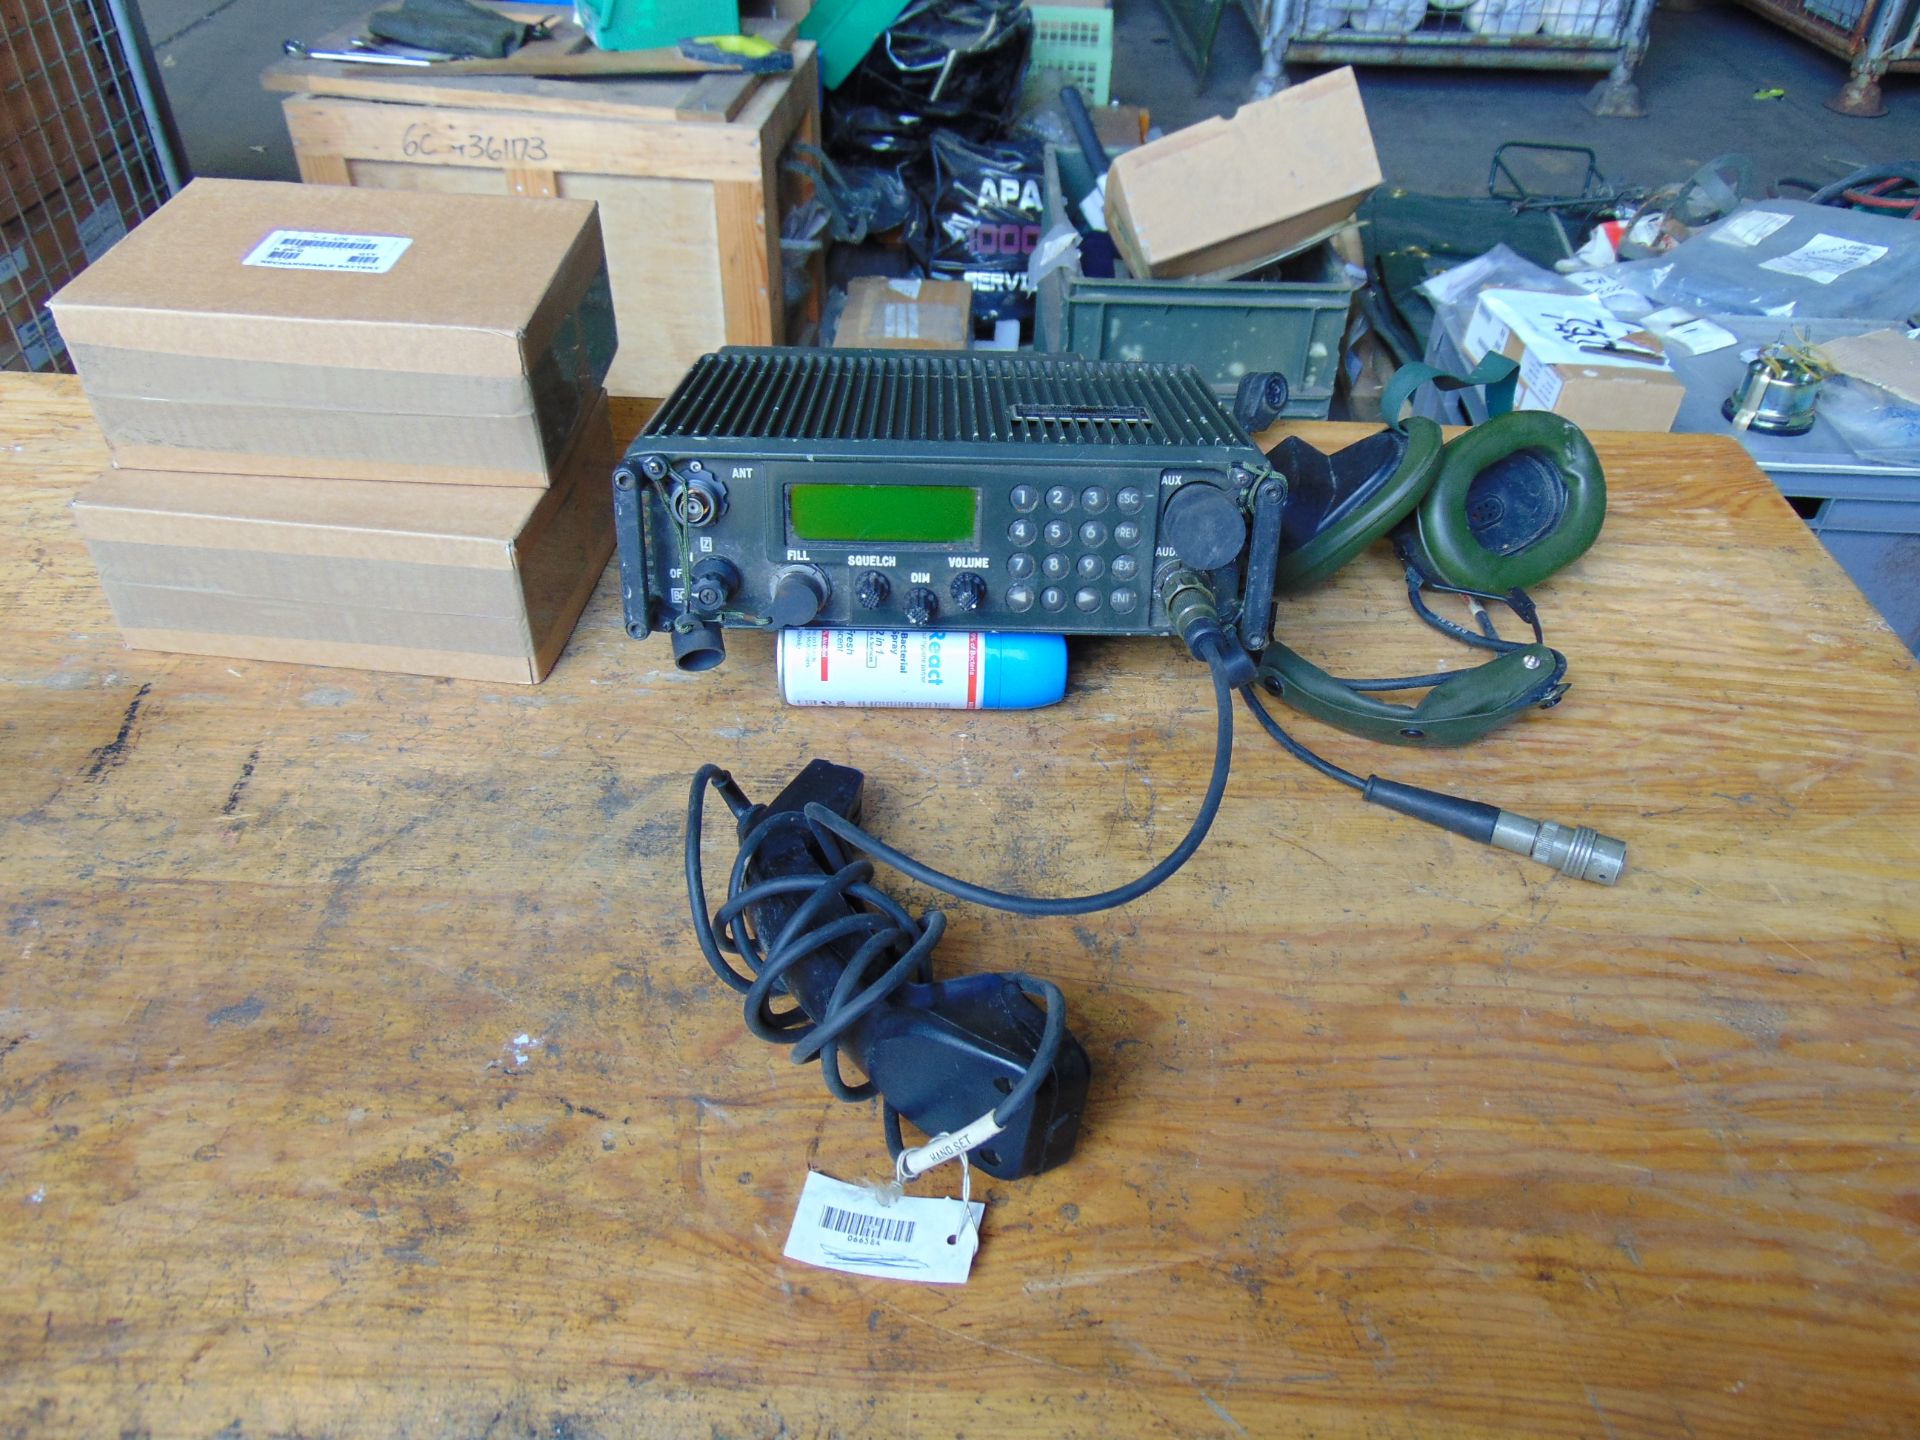 Bowman / Clansman Rayheon RT346 Transmitter Receiver c/w 2 New Batteries, Handset and Headset - Image 3 of 5